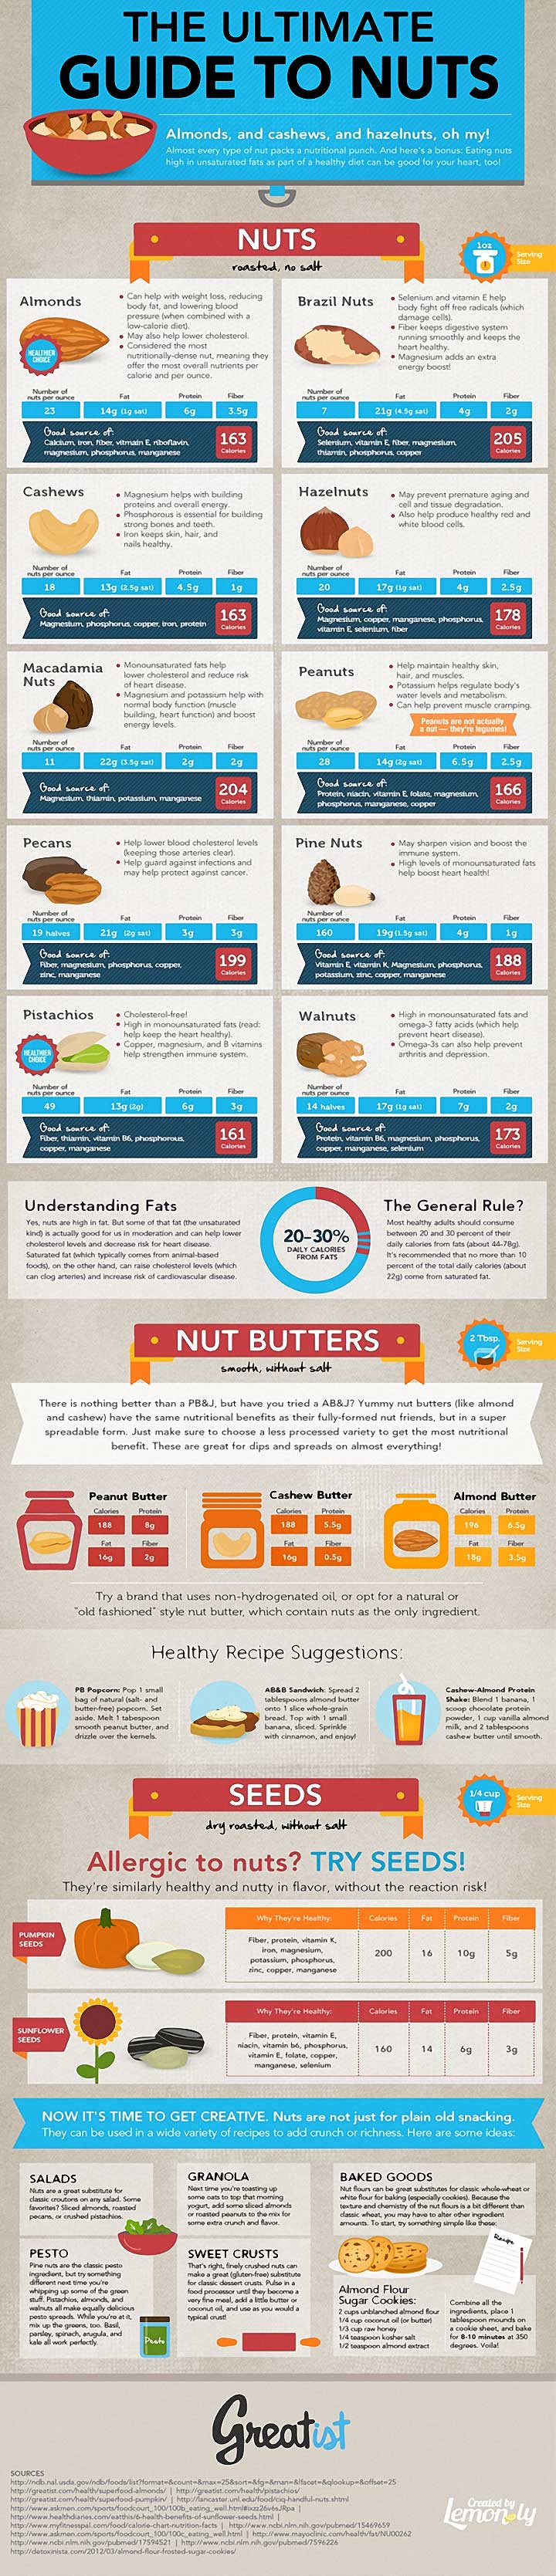 the-ultimate-guide-to-nuts